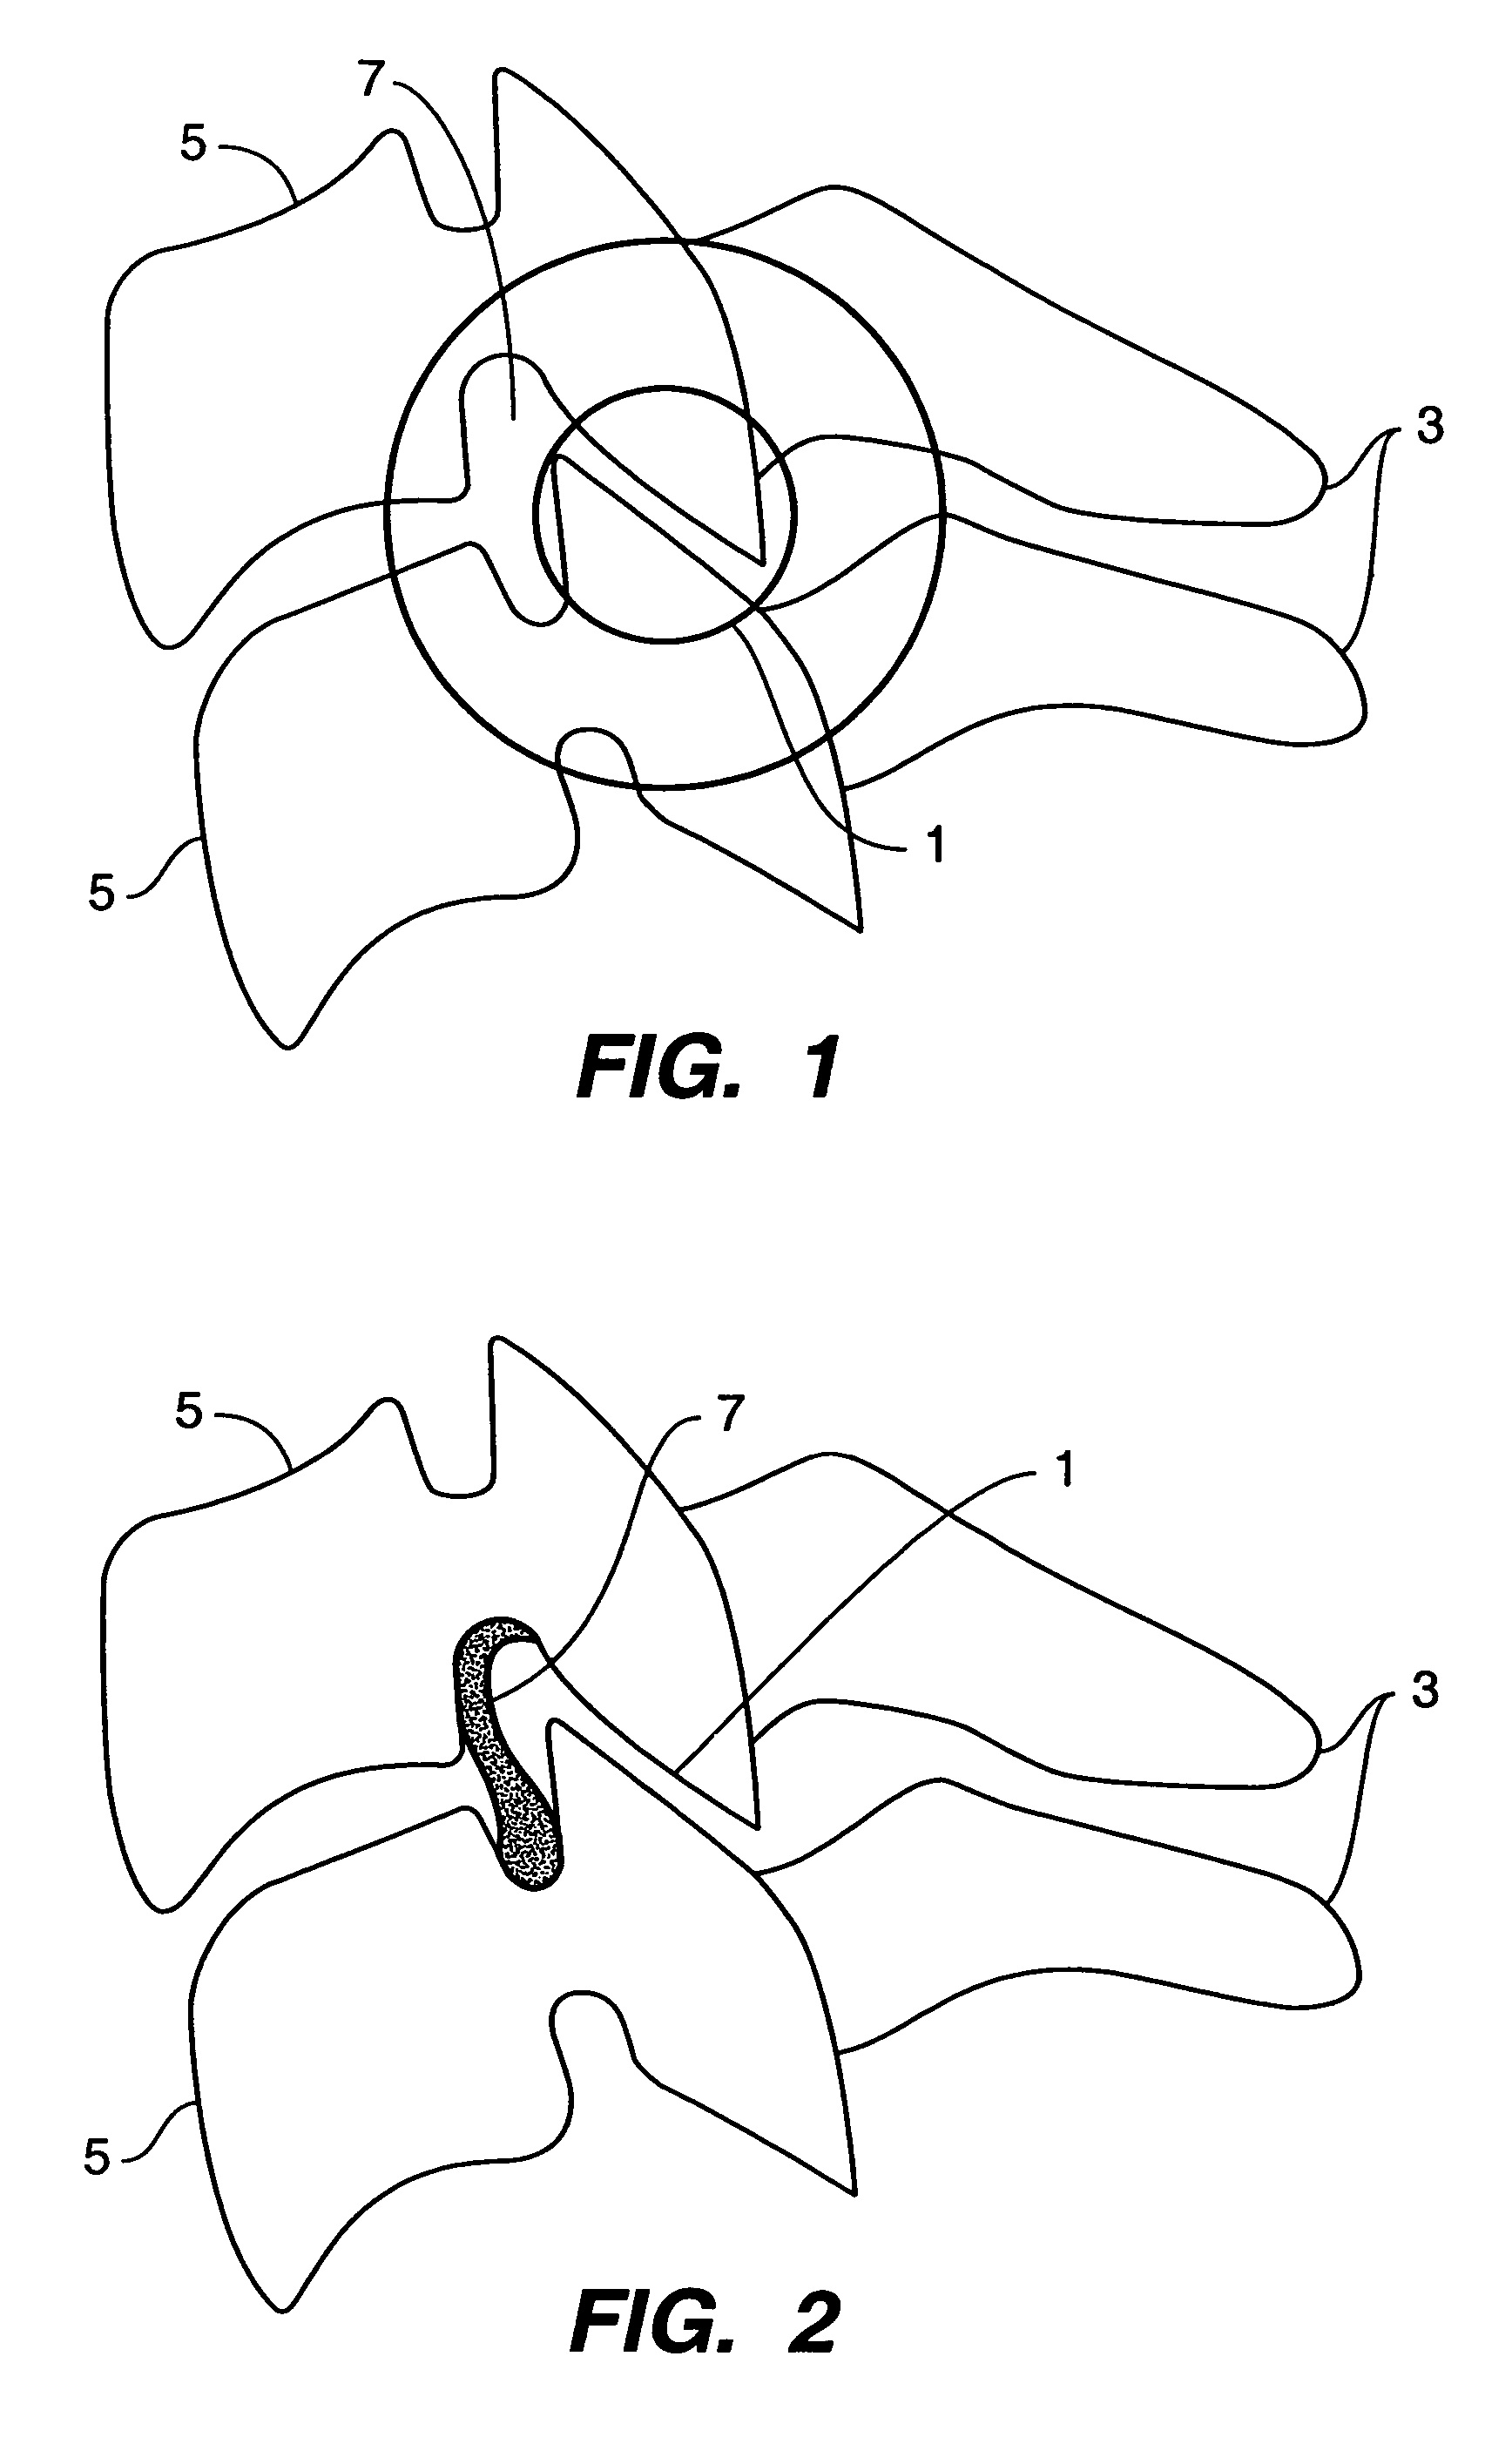 Inter-cervical facet implant with locking screw and method